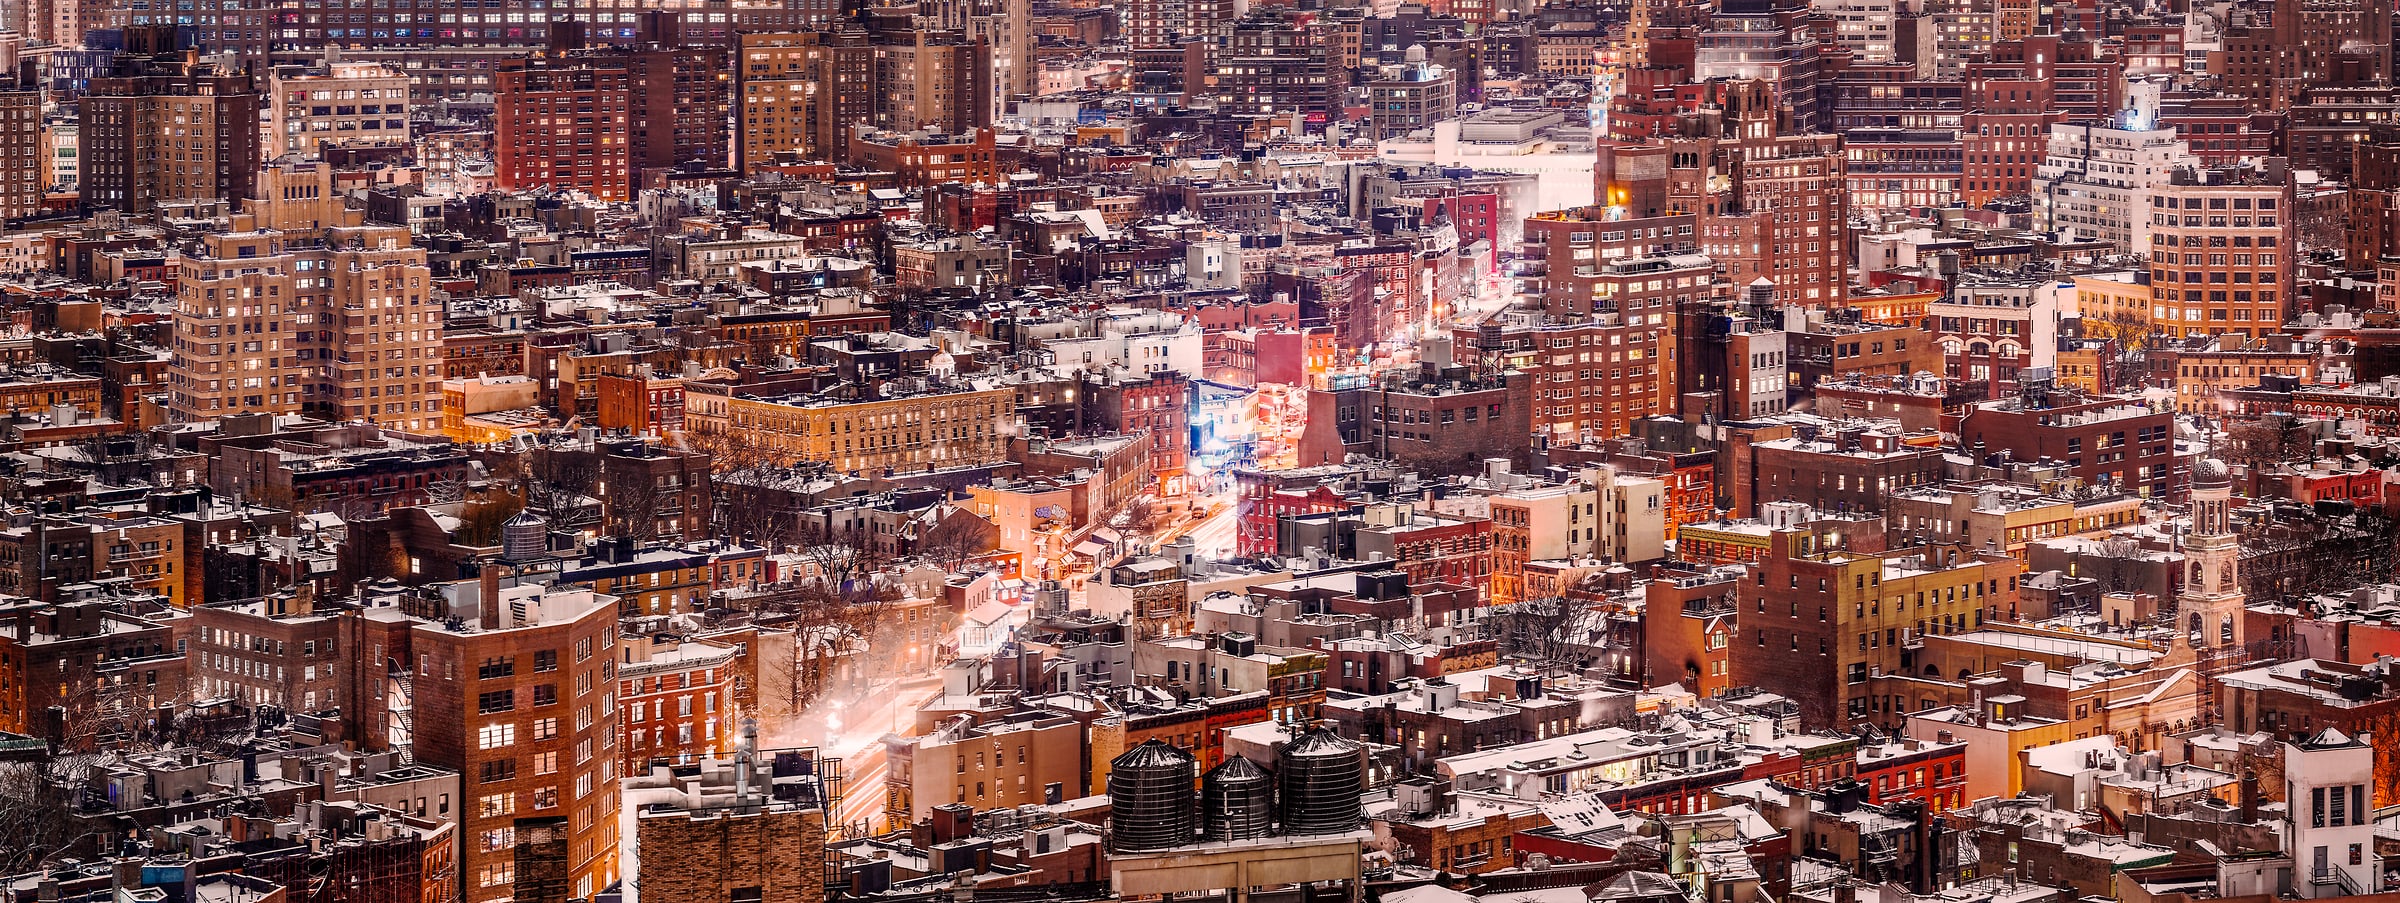 756 megapixels! A very high resolution, large-format VAST photo print of the West Village in NYC at night in winter snow; cityscape fine art photo created by Dan Piech in New York City.